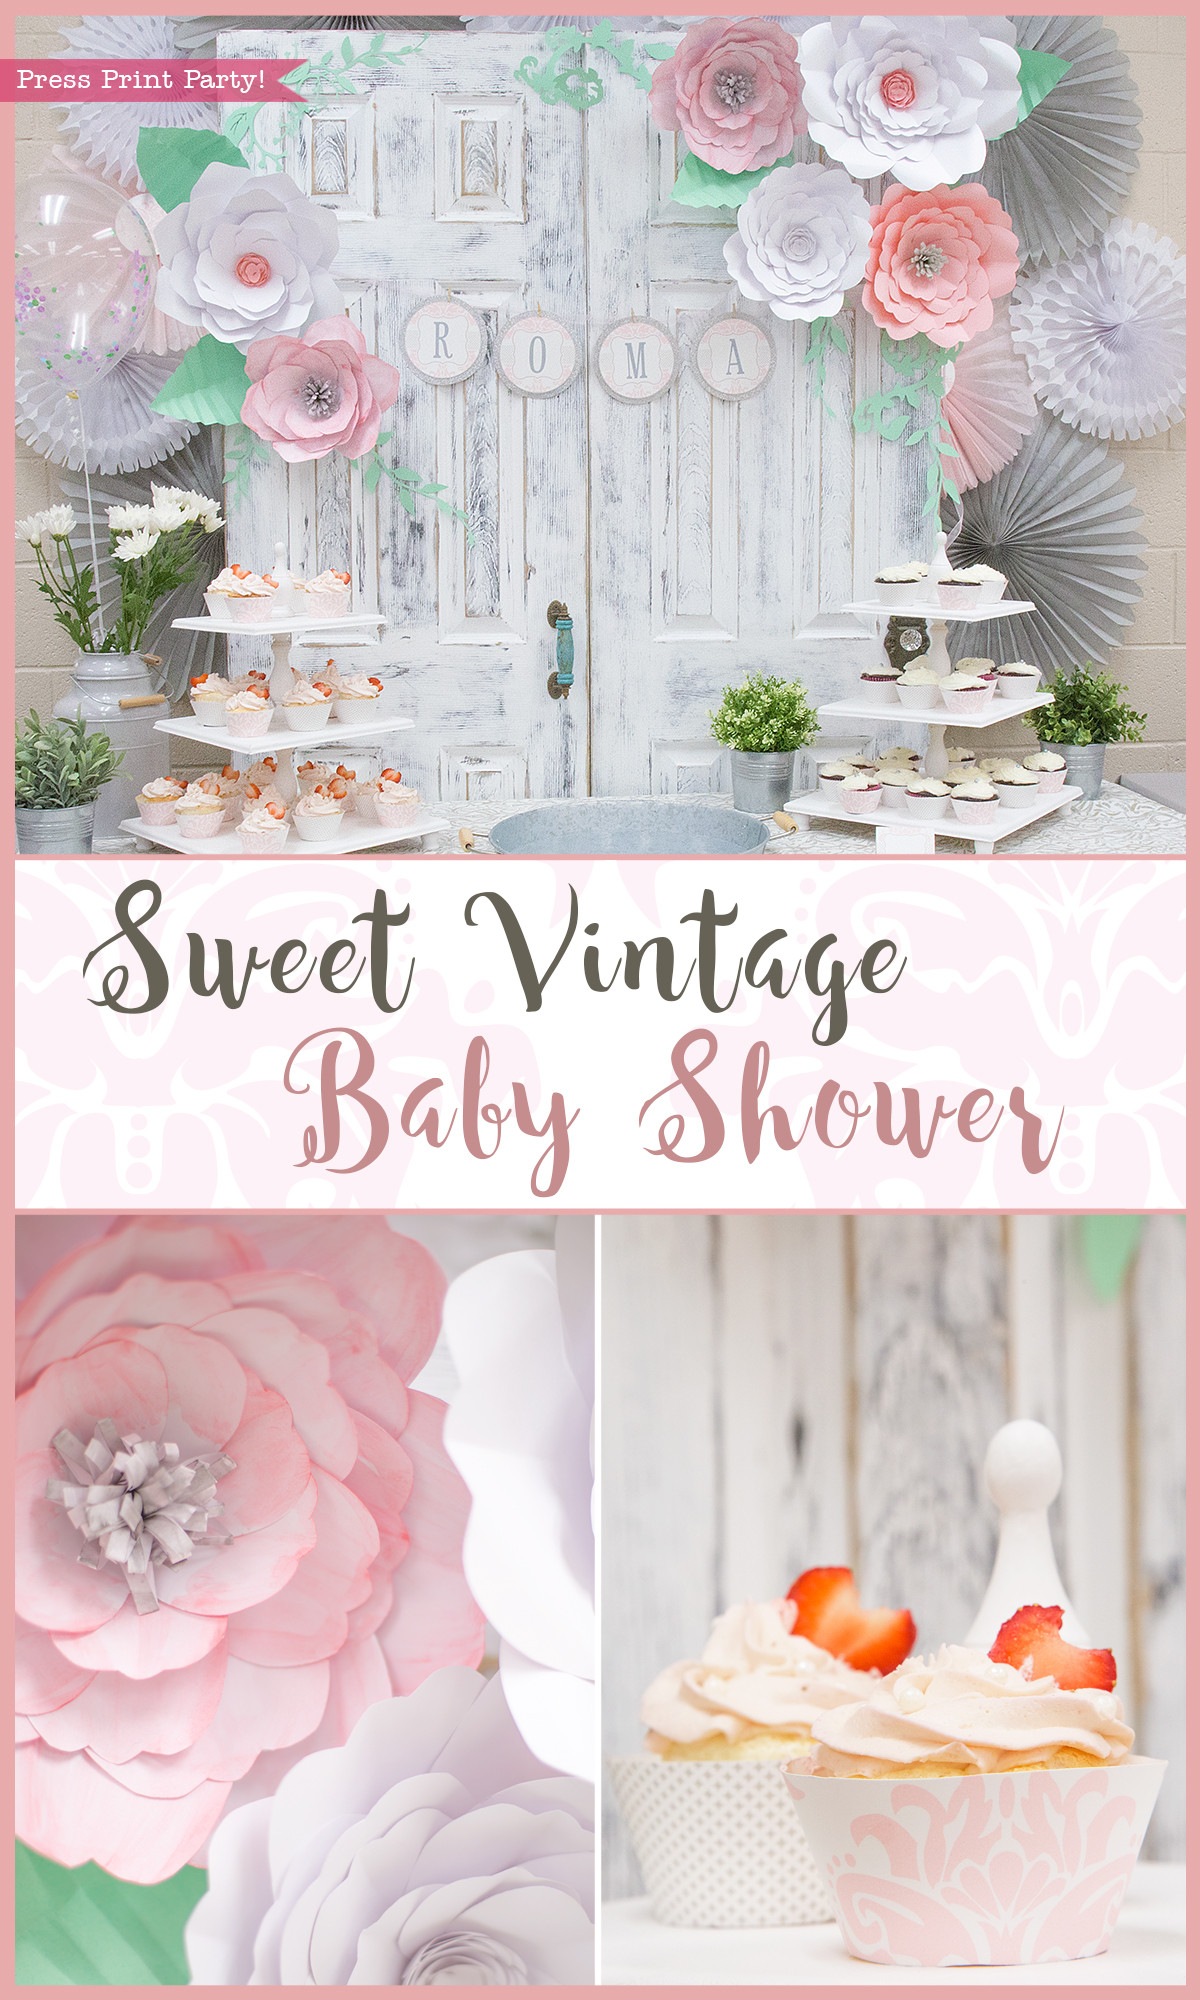 Baby Shower Decor Images
 A Sweet Vintage Baby Shower By Press Print Party